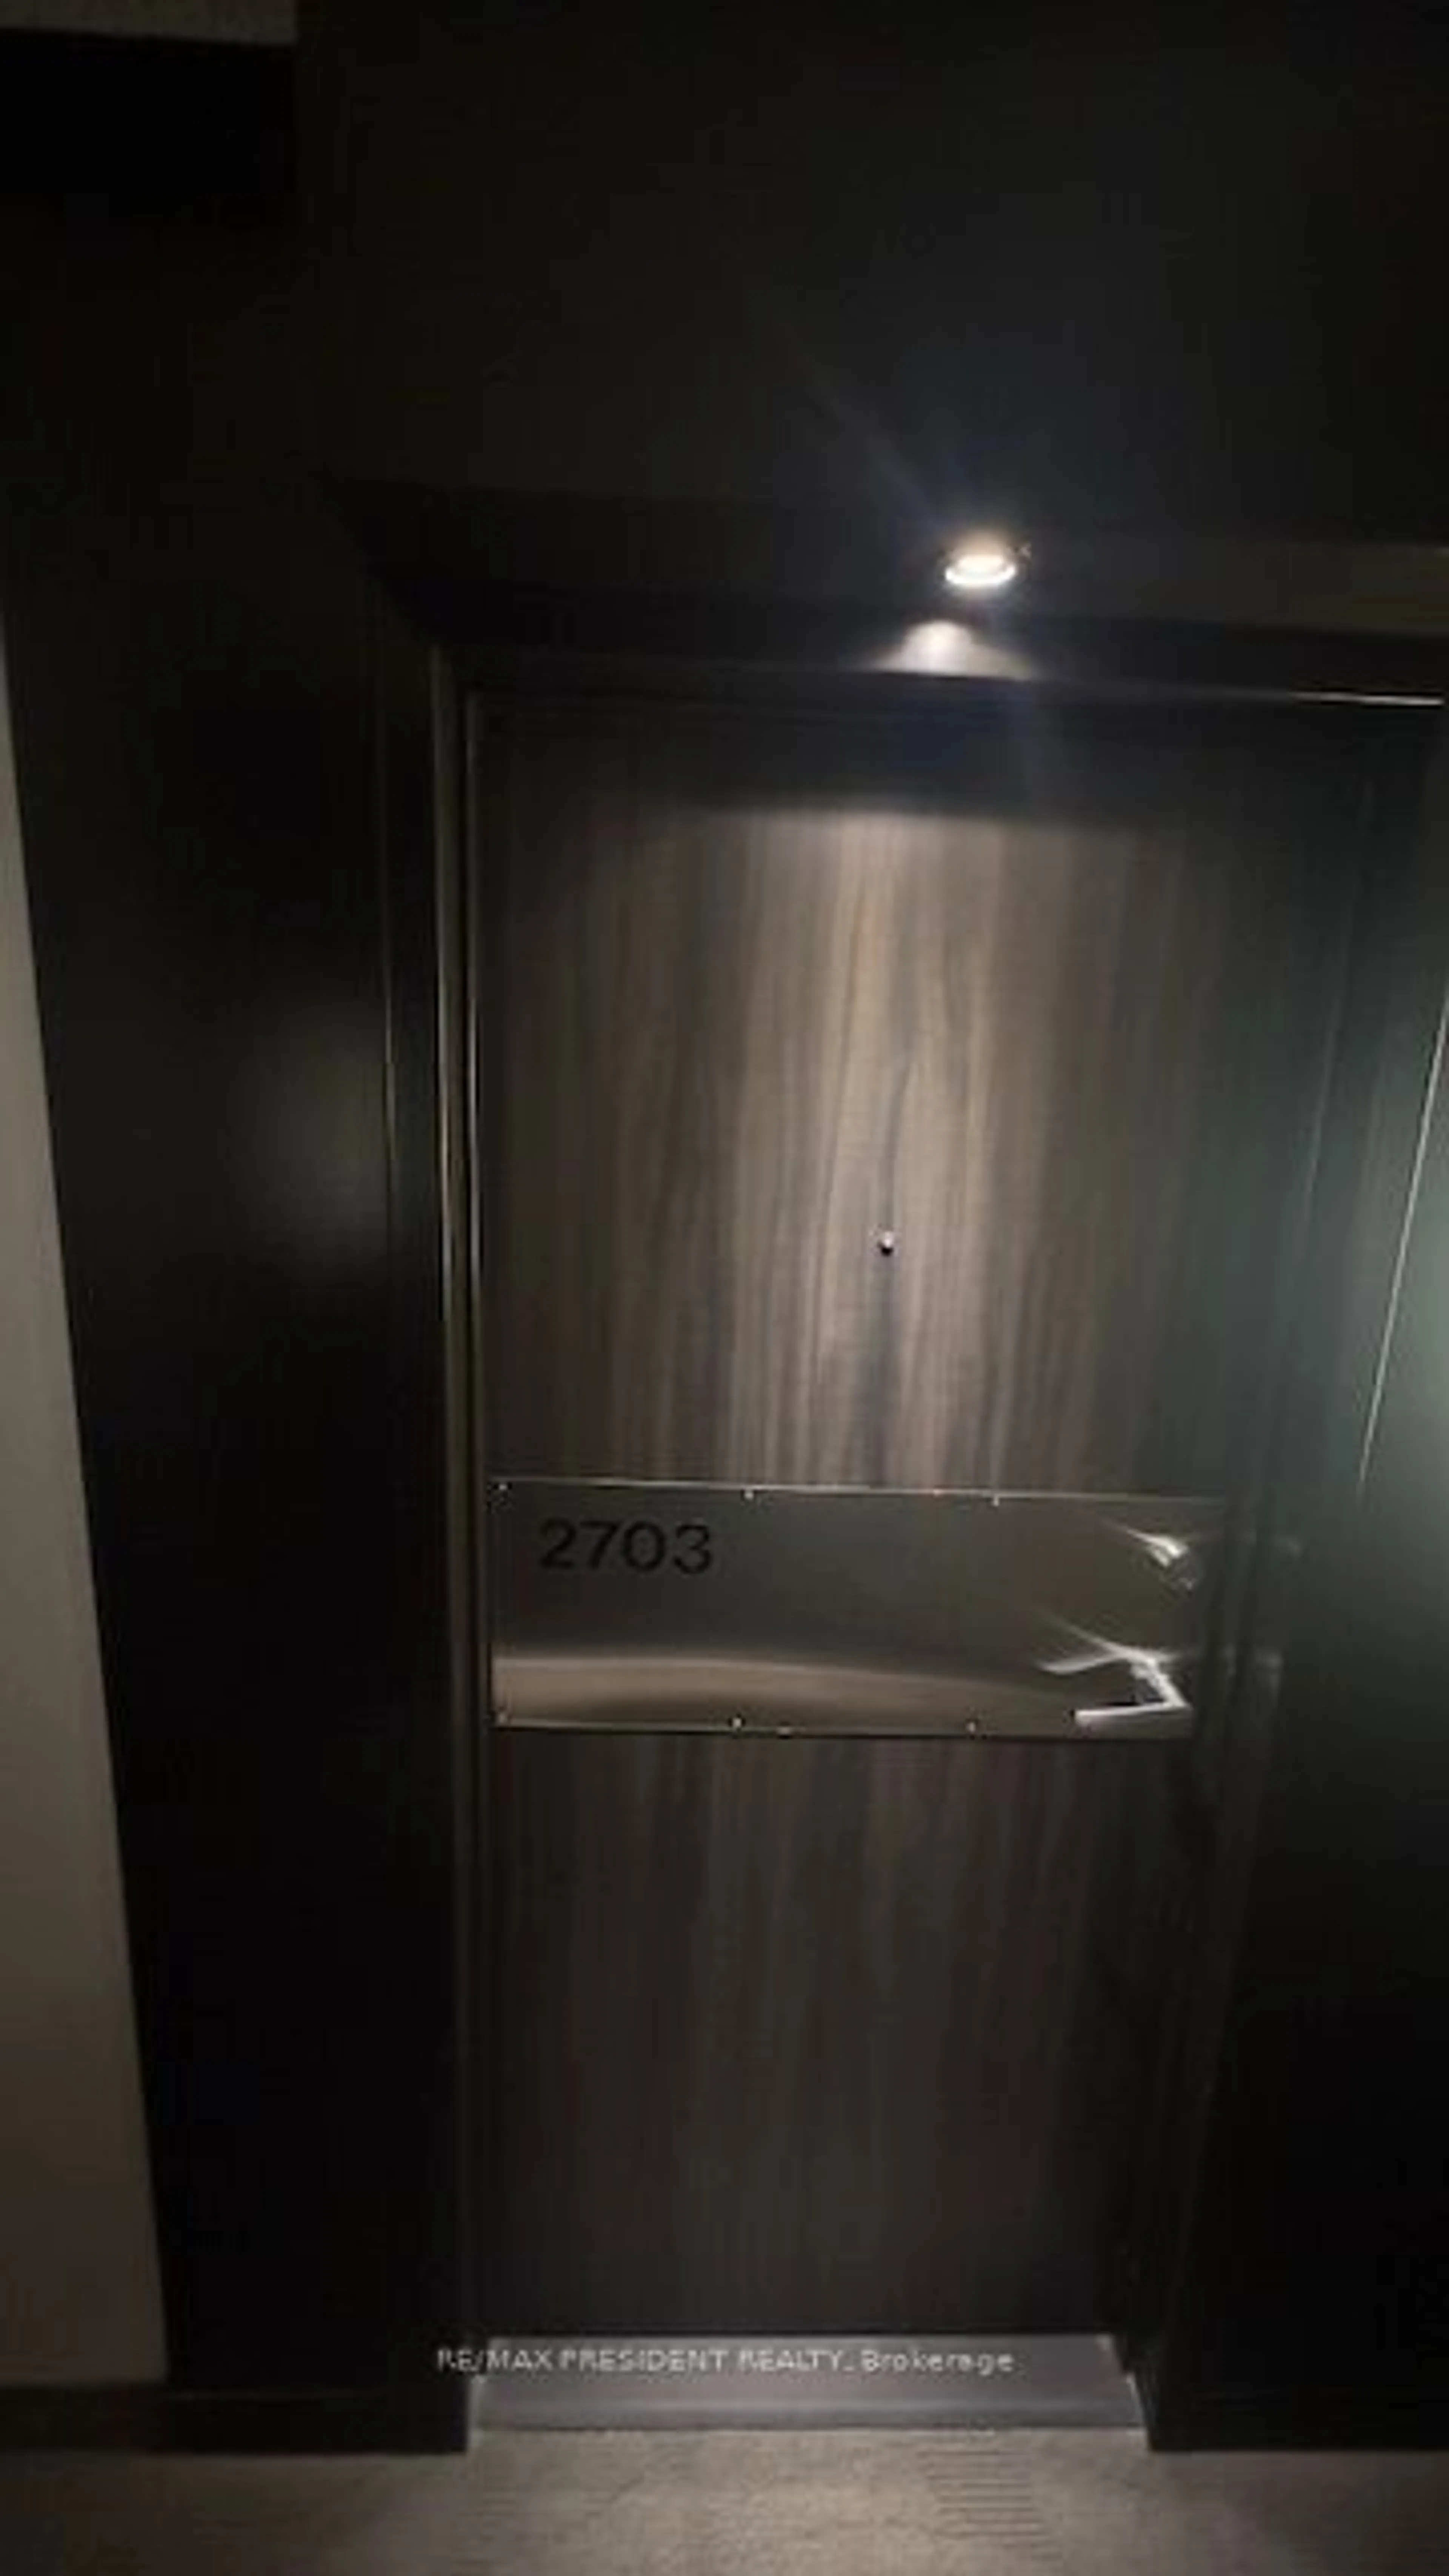 A pic of a room for 210 Victoria St #2703, Toronto Ontario M5B 2R3